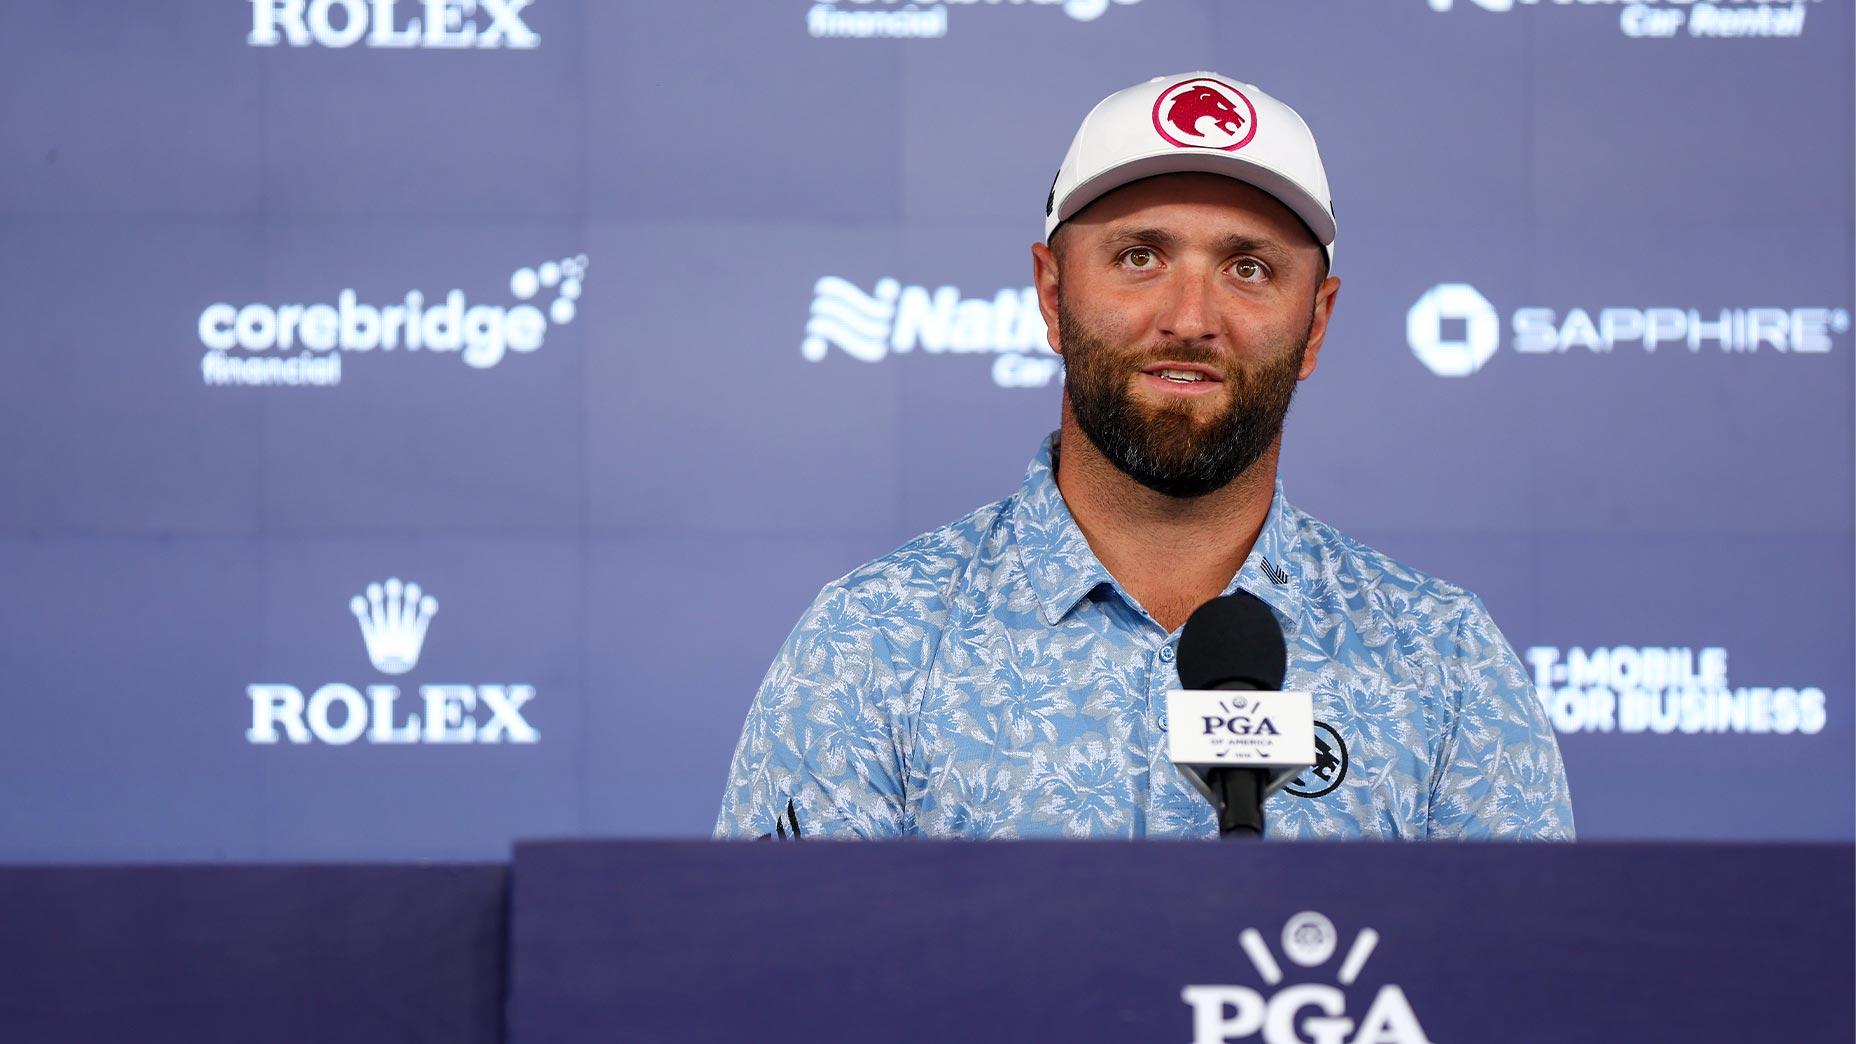 jon rahm speaks at press conference at the PGA Championship in blue shirt and red hat